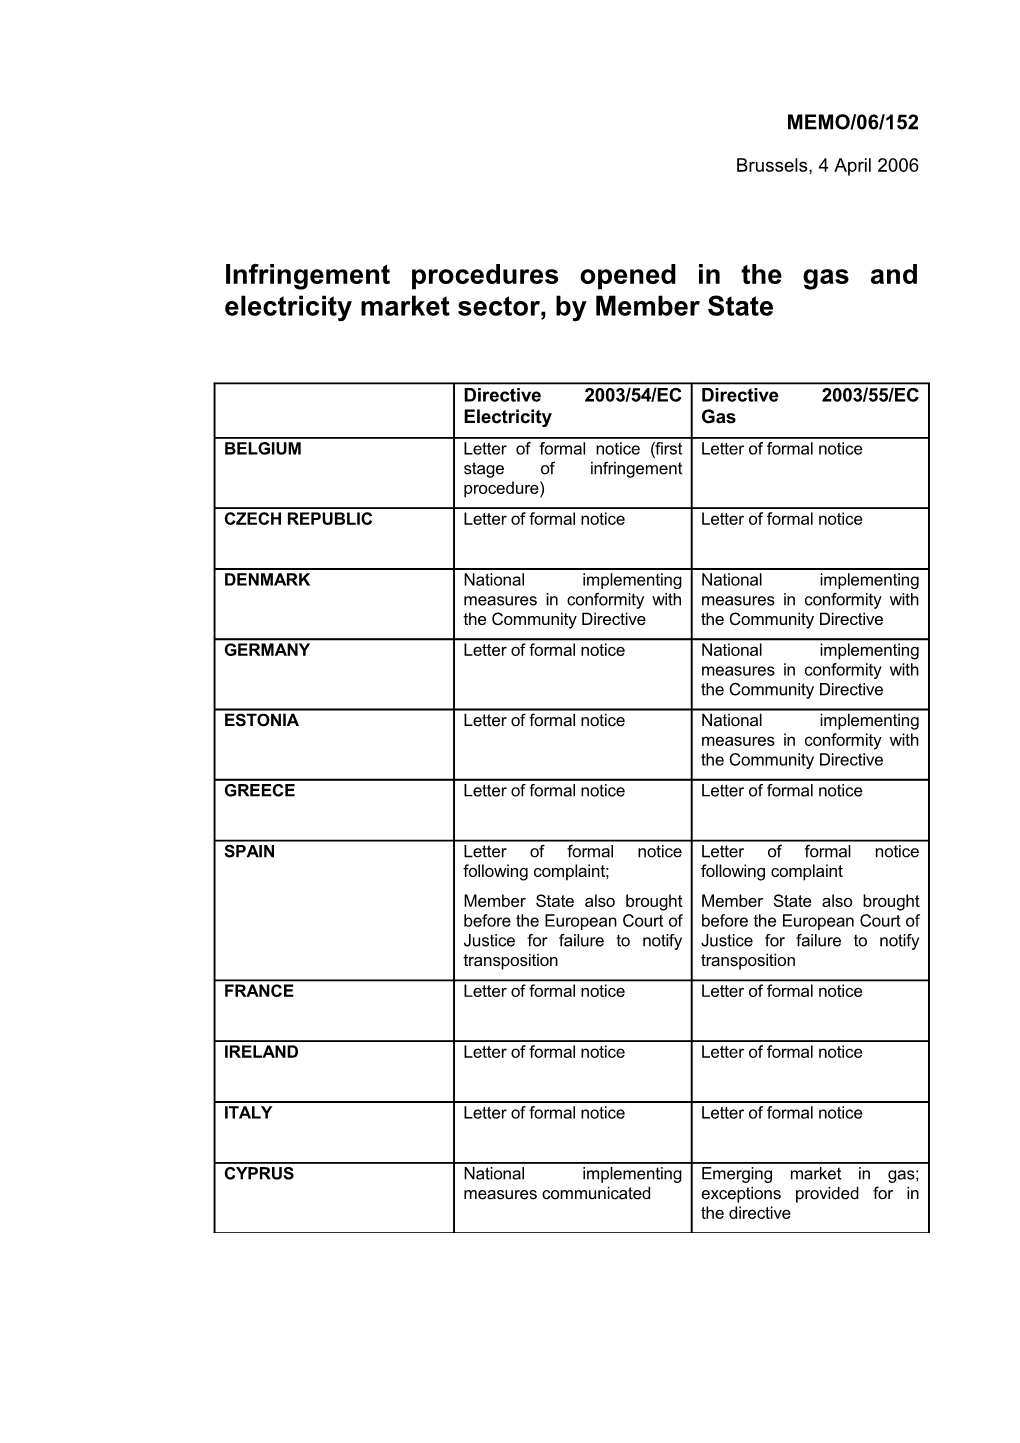 Infringement Procedures Opened in the Gas and Electricity Market Sector, by Member State